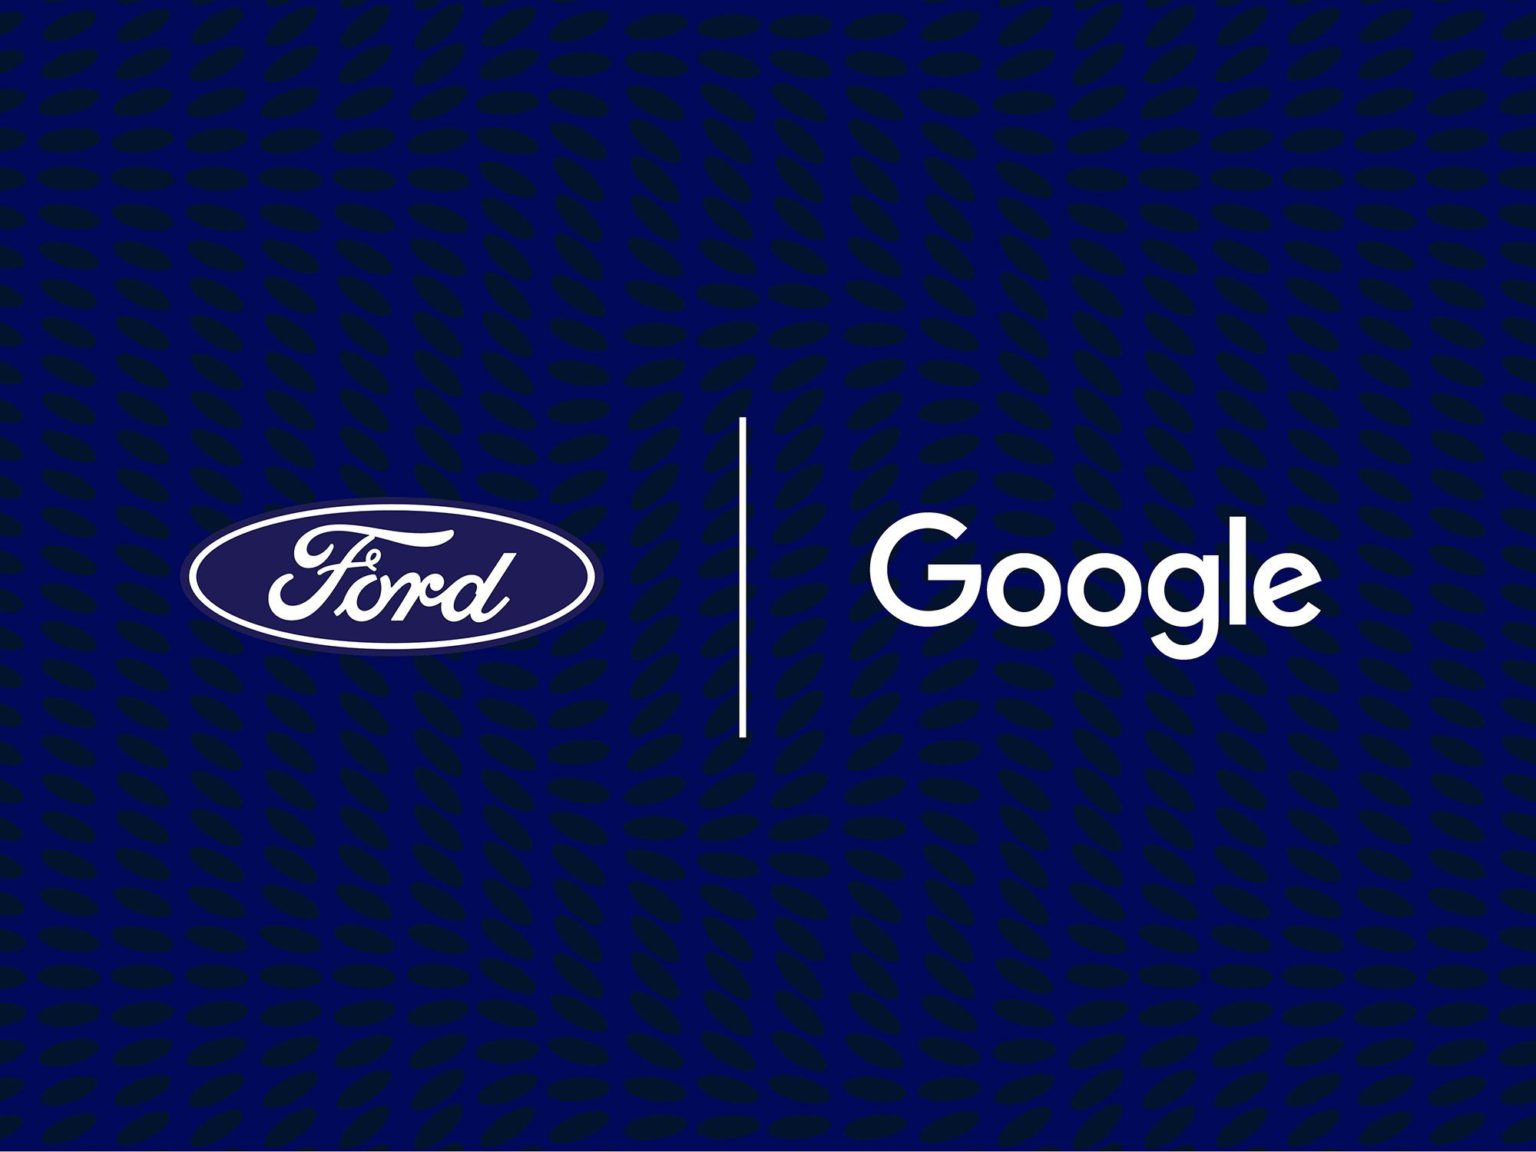 Ford and Google are teaming up to launch a new technology initiaitve.